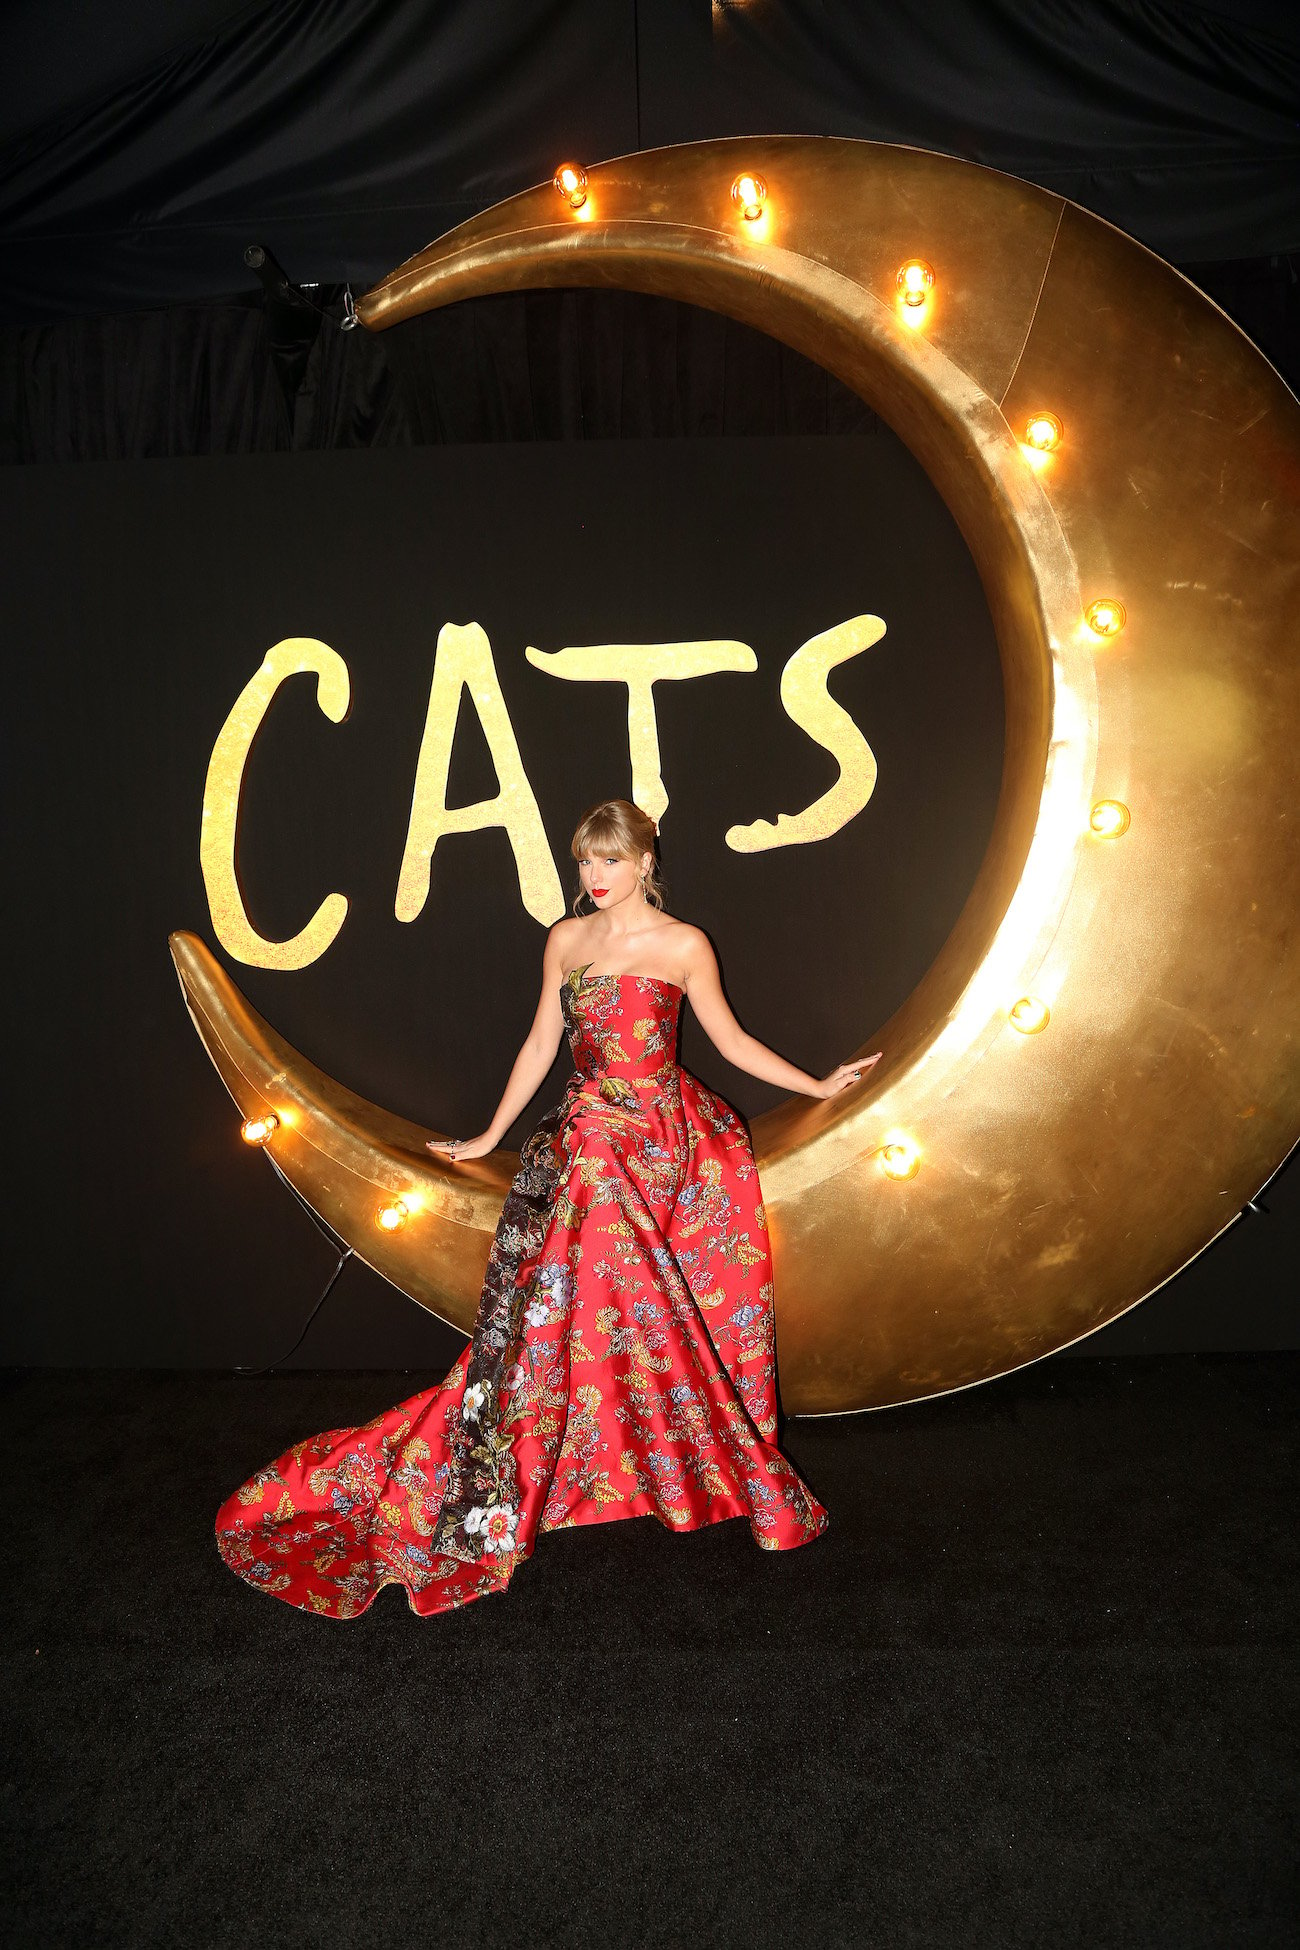 Taylor Swift poses at the World Premiere of the new film "Cats"